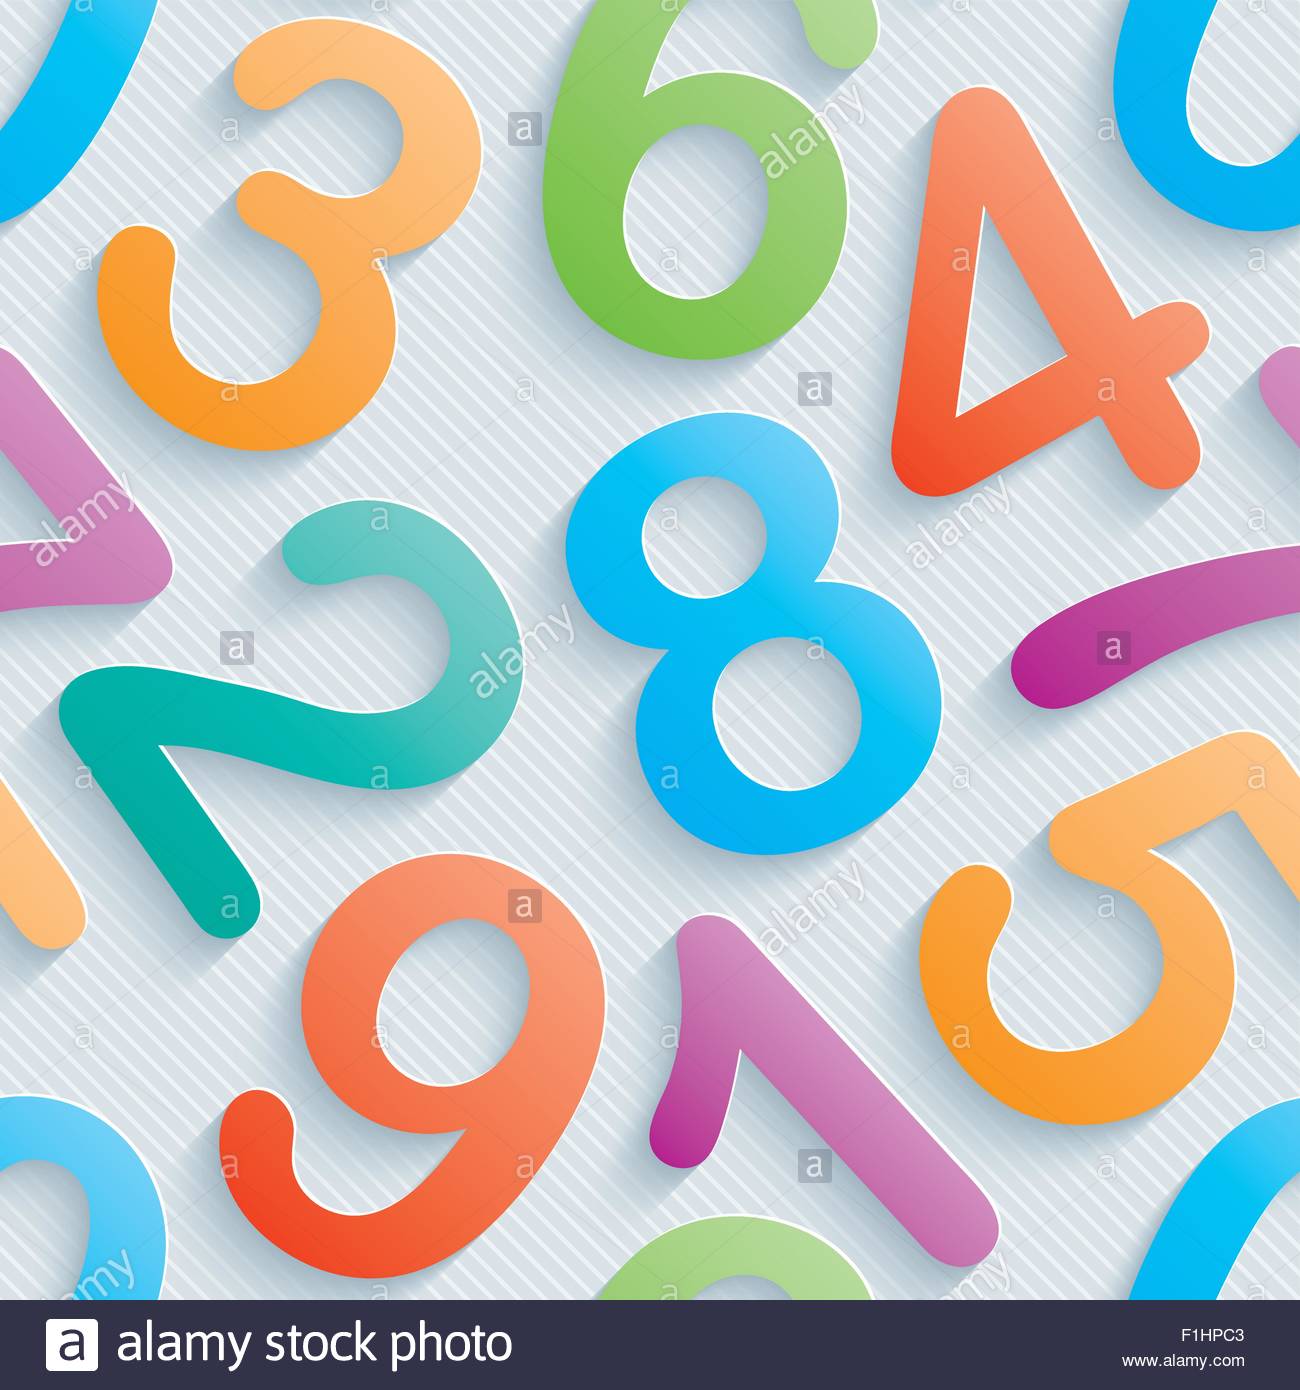 Colorful Numbers Wallpaper Seamless Background With 3d Effect